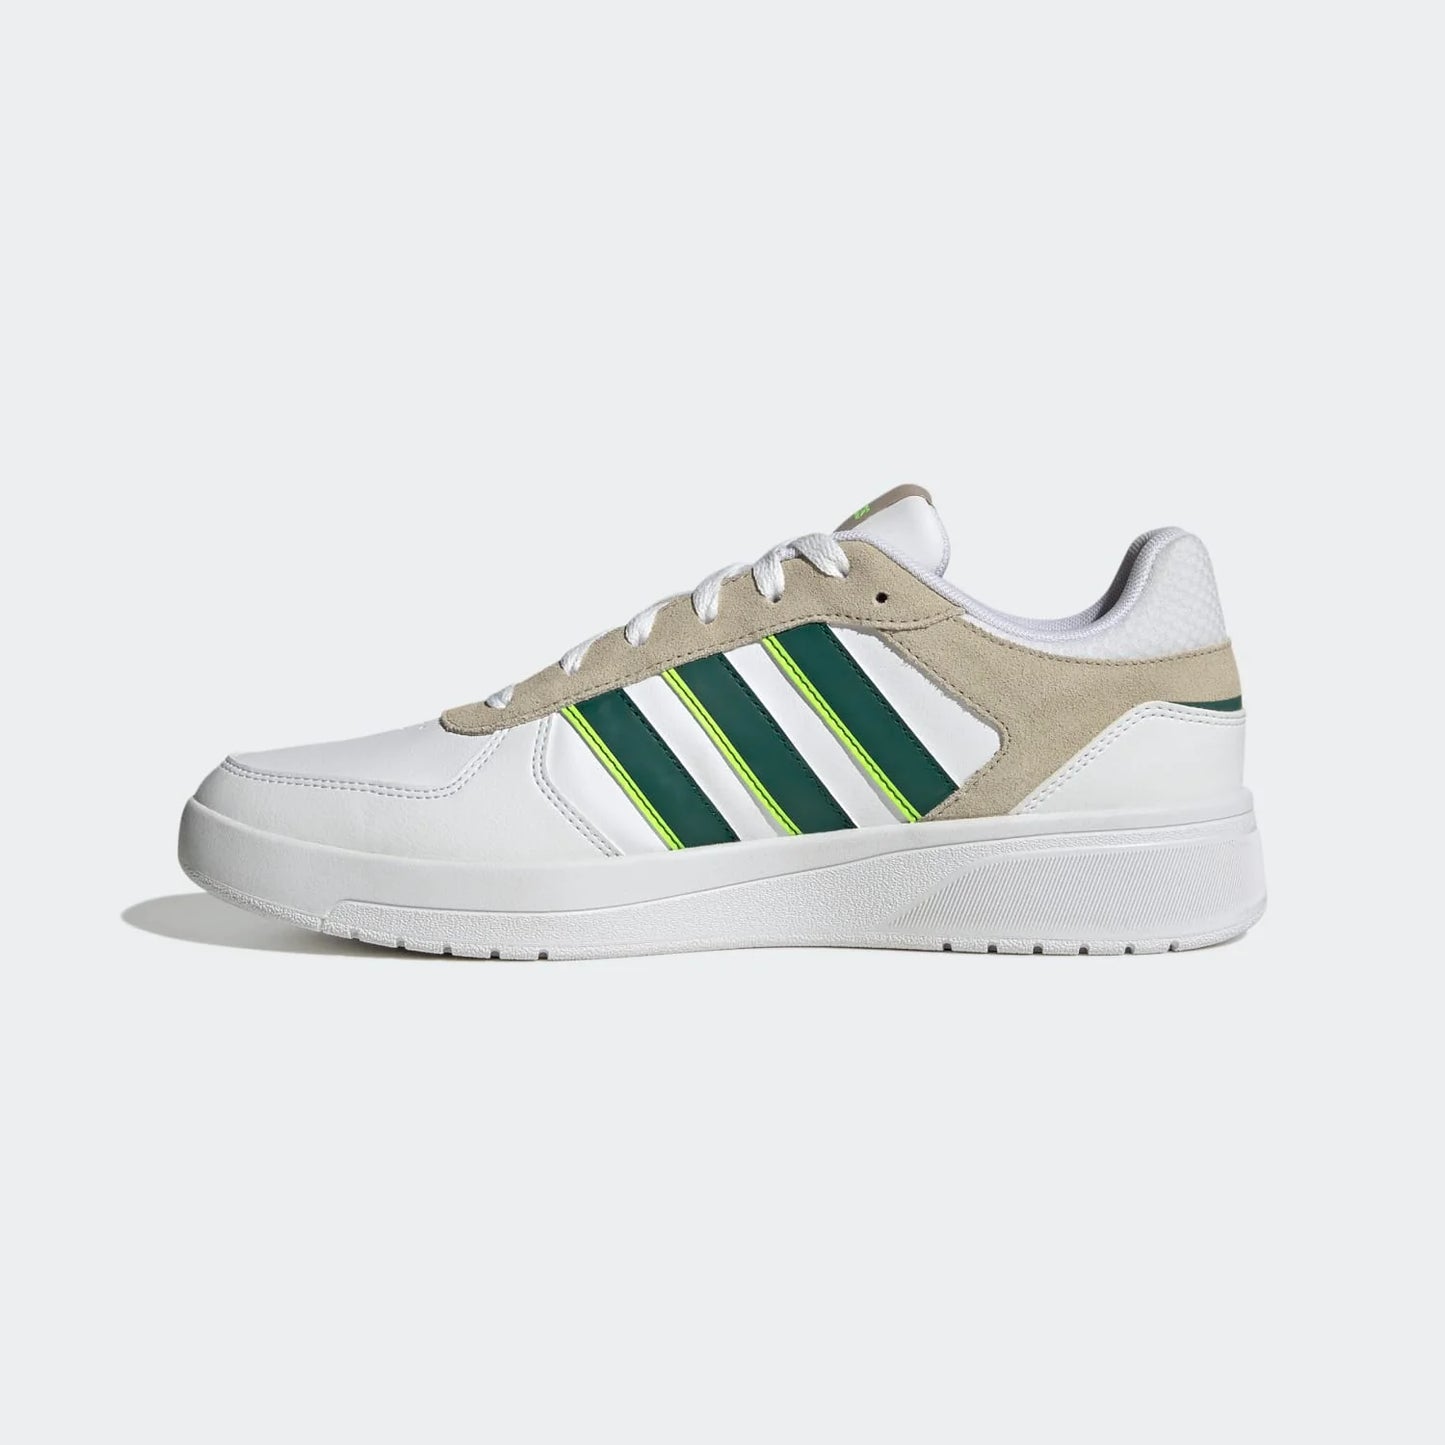 ADIDAS COURTBREAT MALE